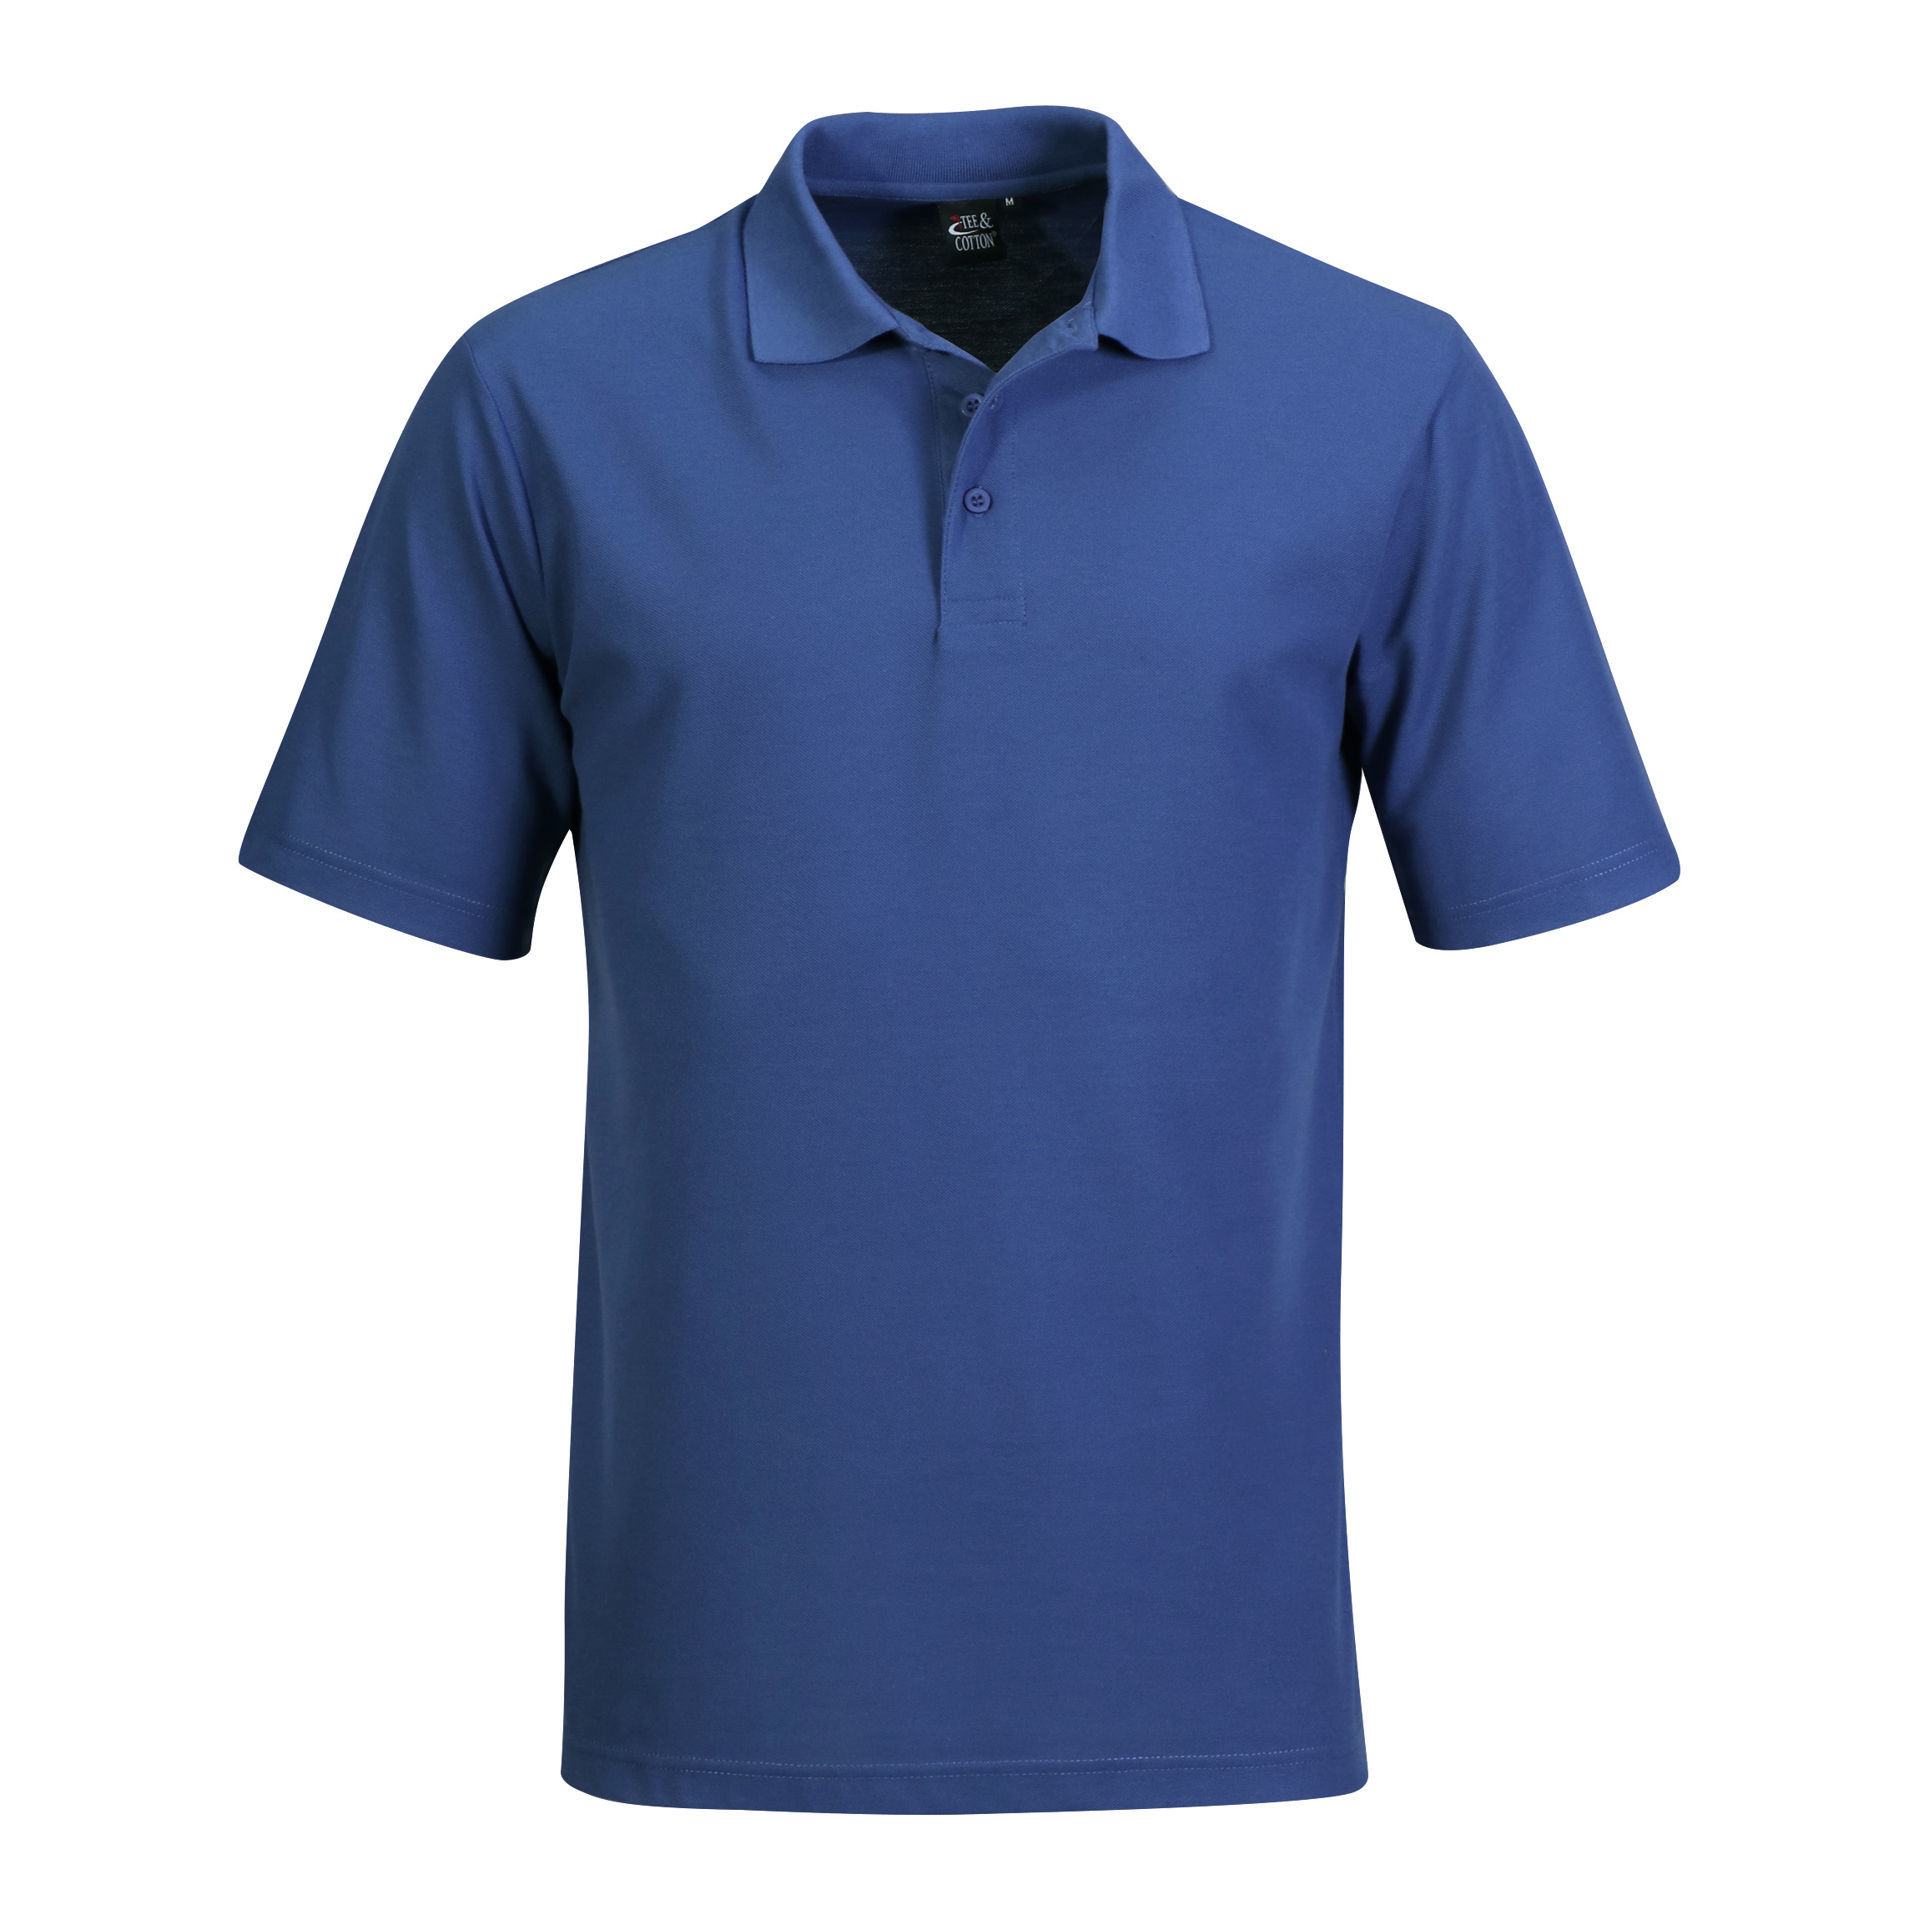 Proactive Clothing Classic Pique Knit Polo